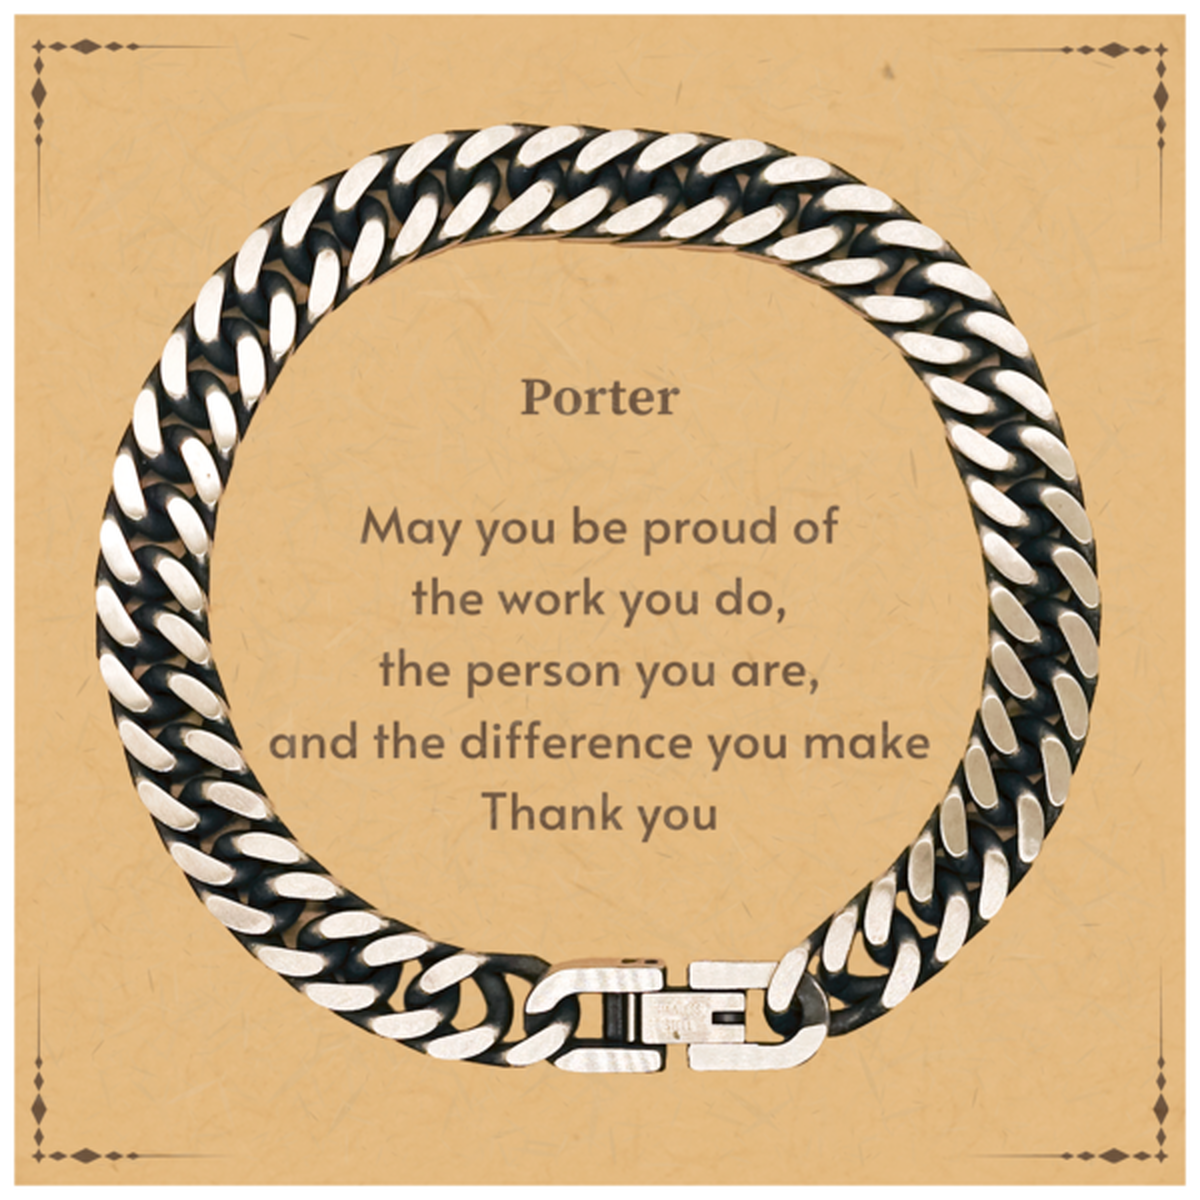 Heartwarming Cuban Link Chain Bracelet Retirement Coworkers Gifts for Porter, Porter May You be proud of the work you do, the person you are Gifts for Boss Men Women Friends